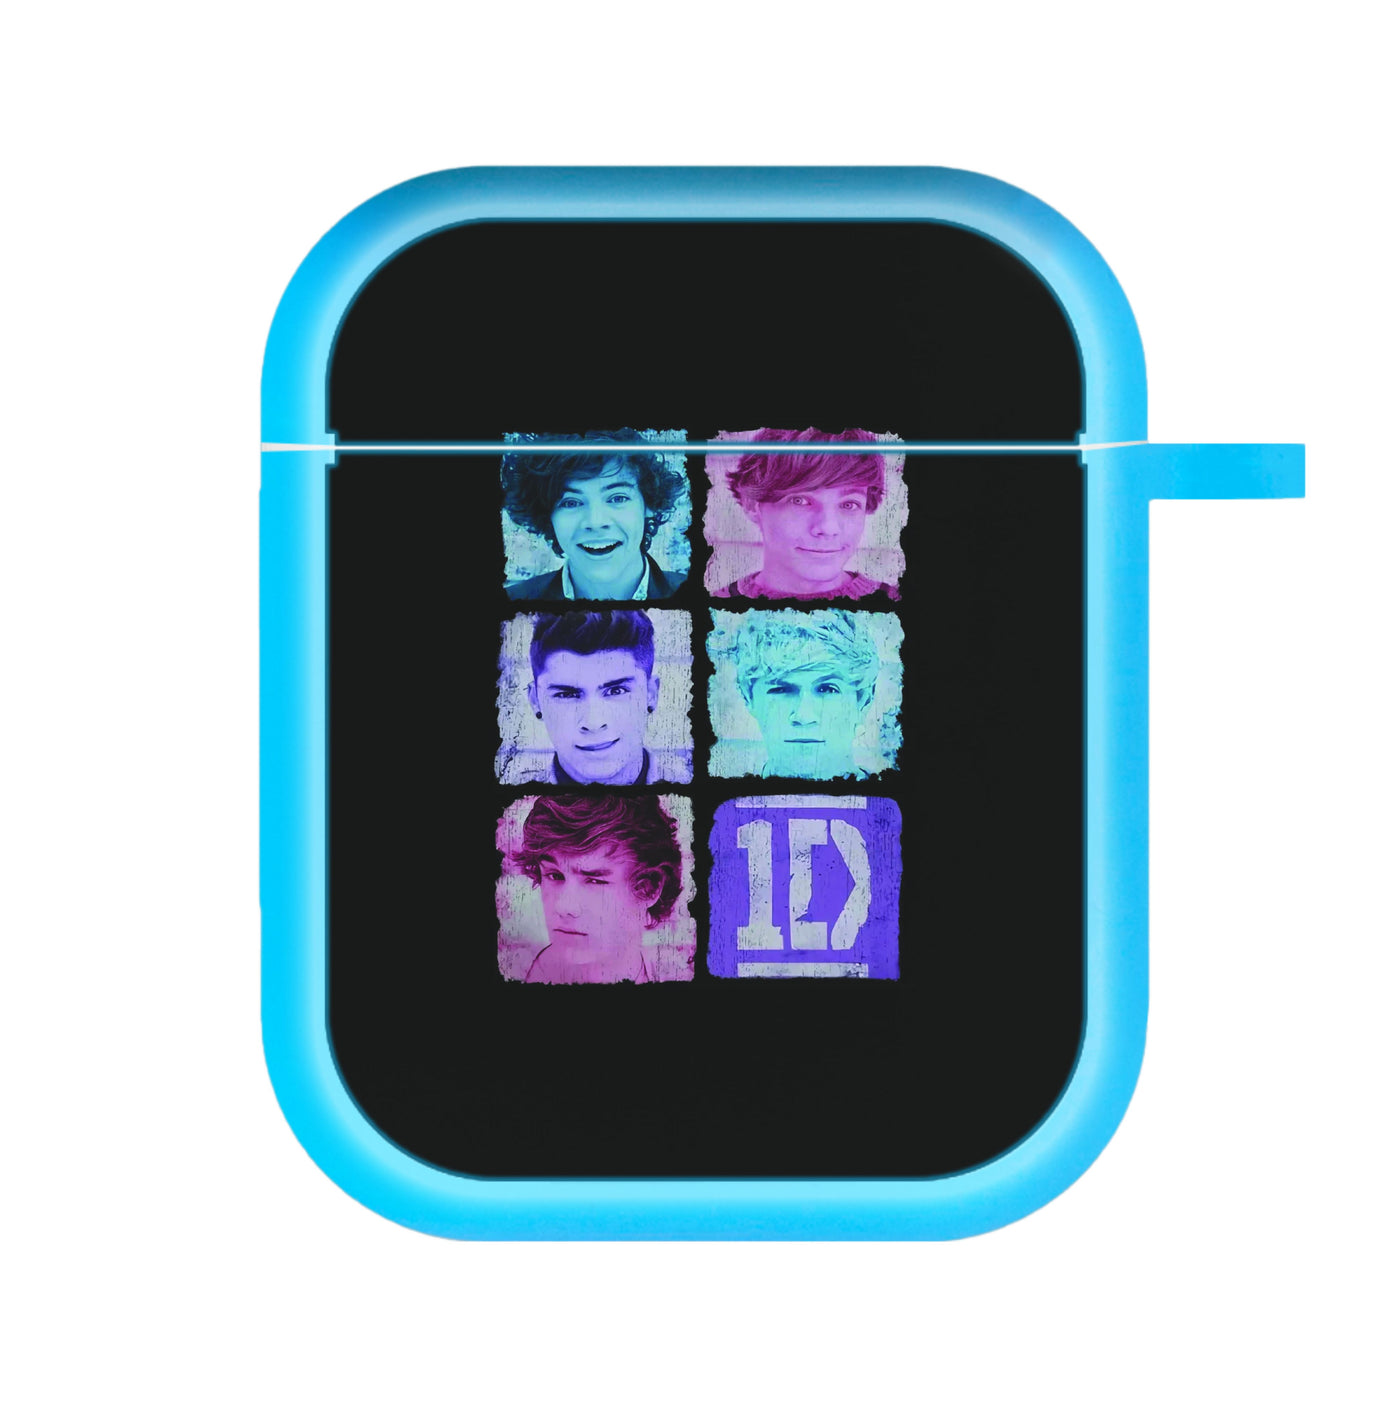 1D Memebers - One Direction AirPods Case